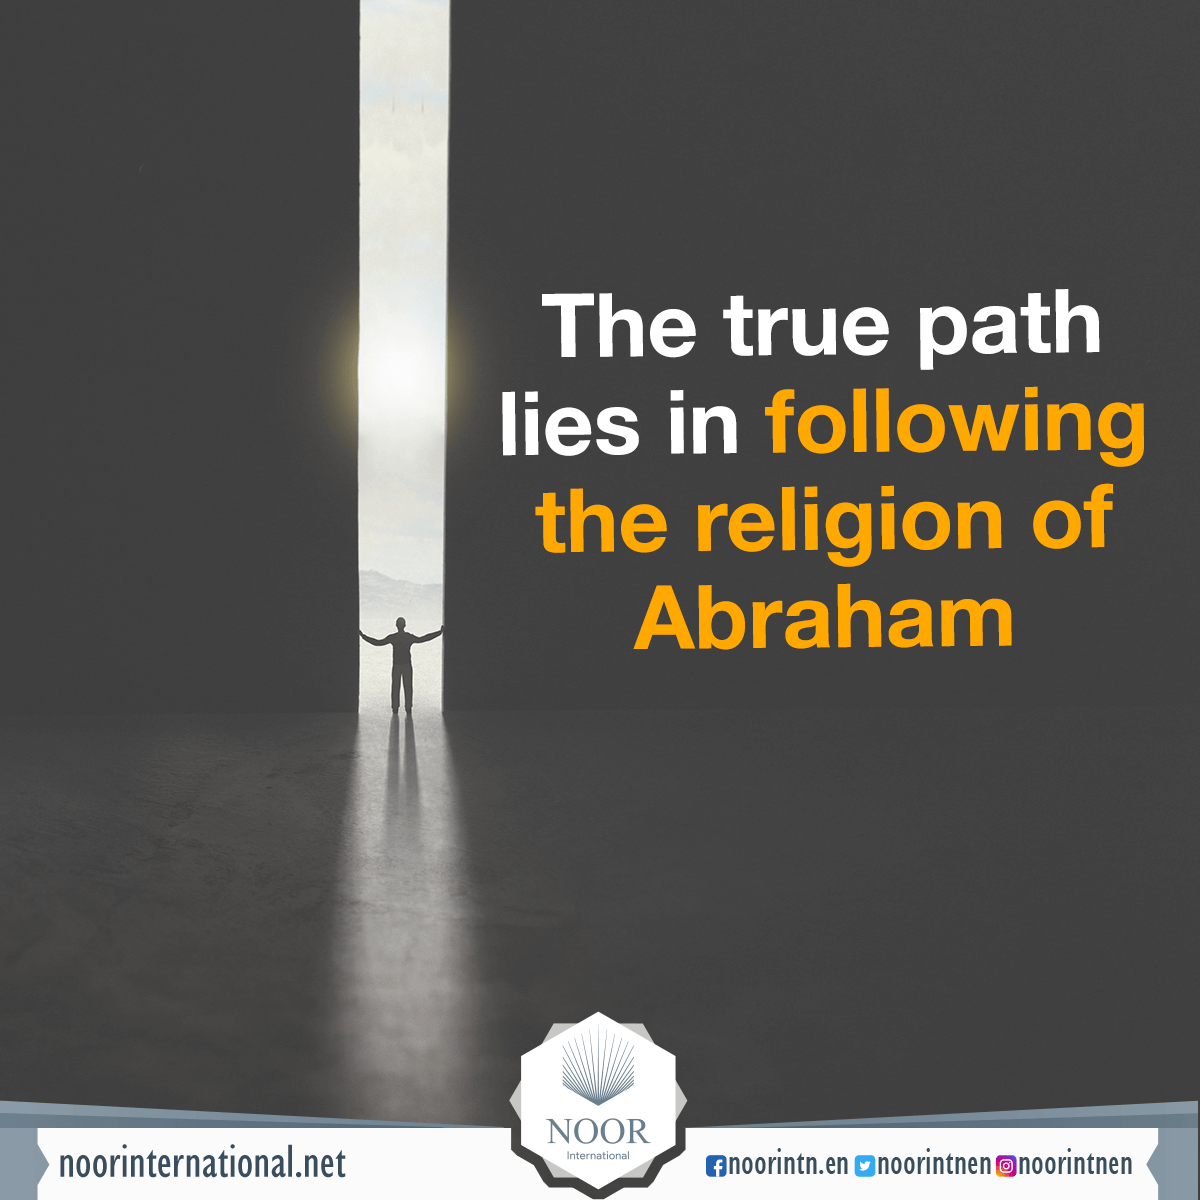 The true path lies in following the religion of Abraham